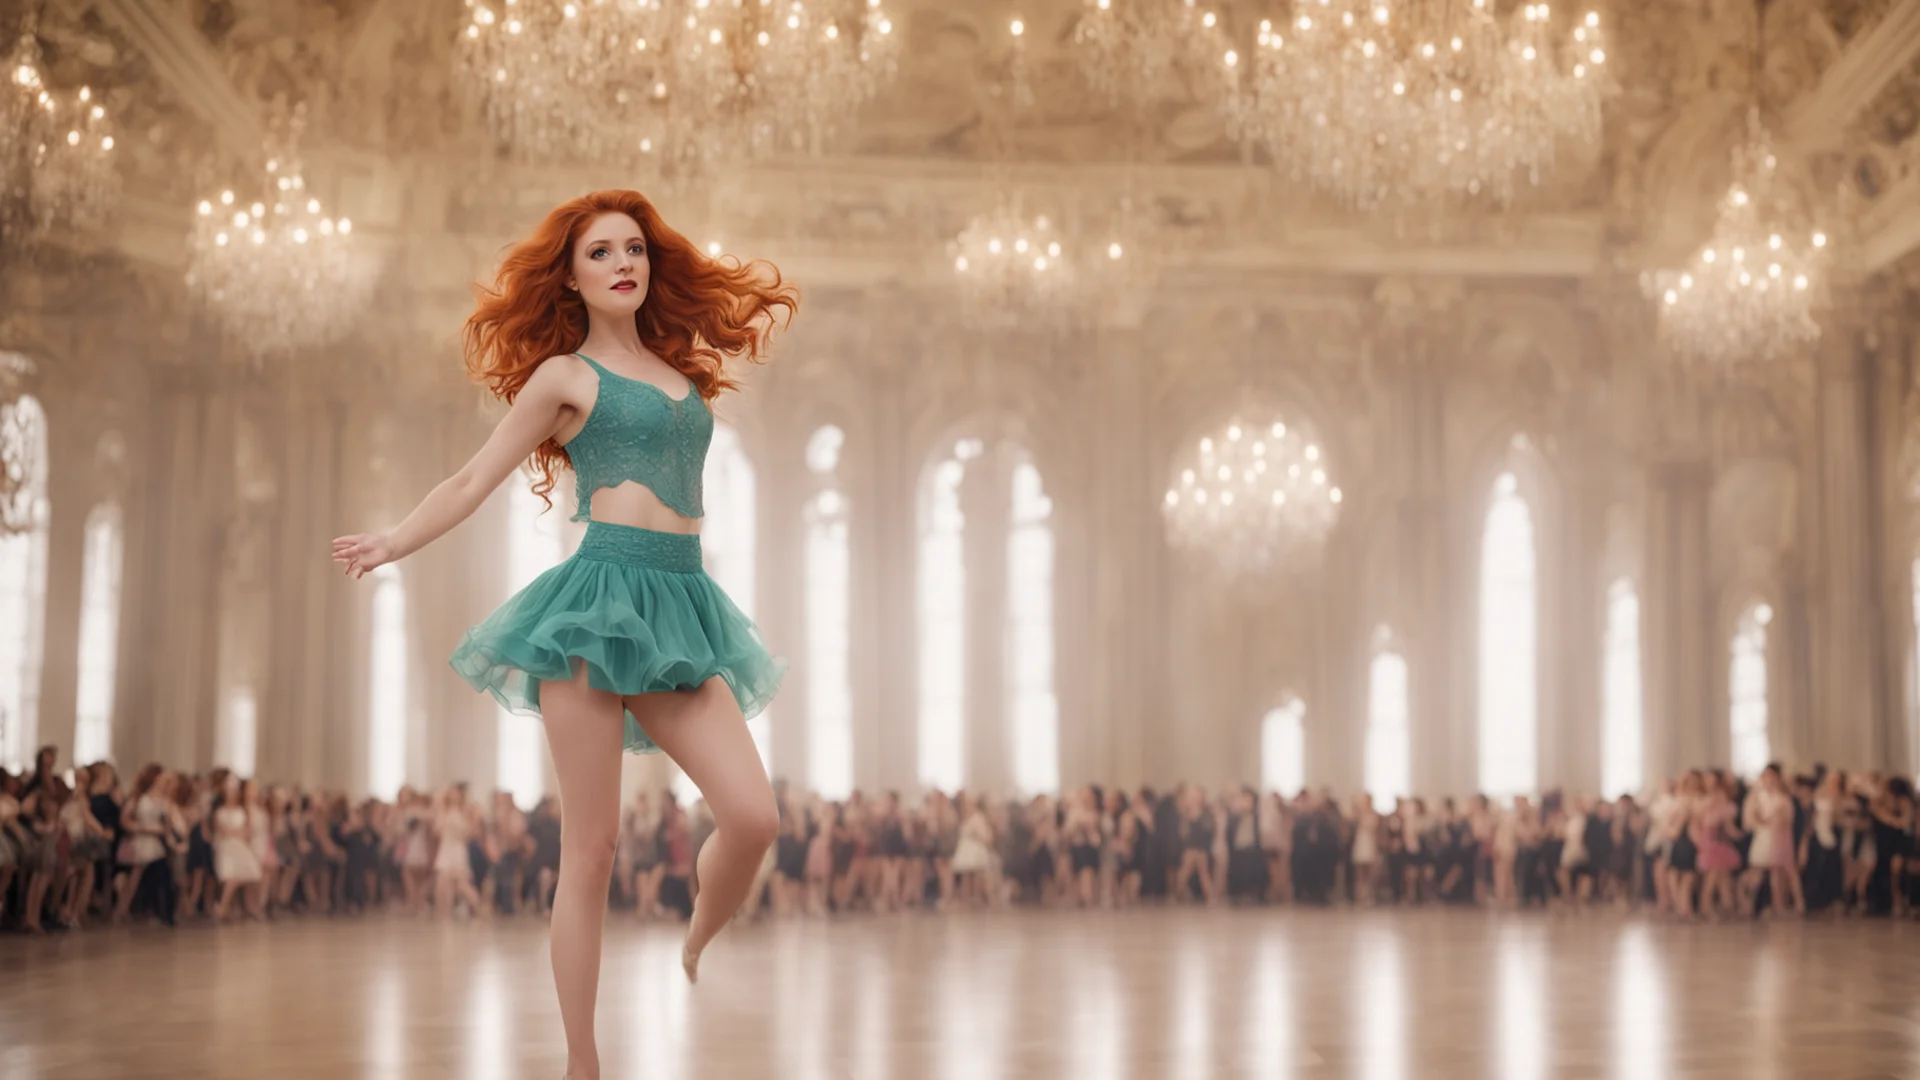 a ginger haired girl with short skirt dancing in a gigantic ballroom good looking trending fantastic 1 wide